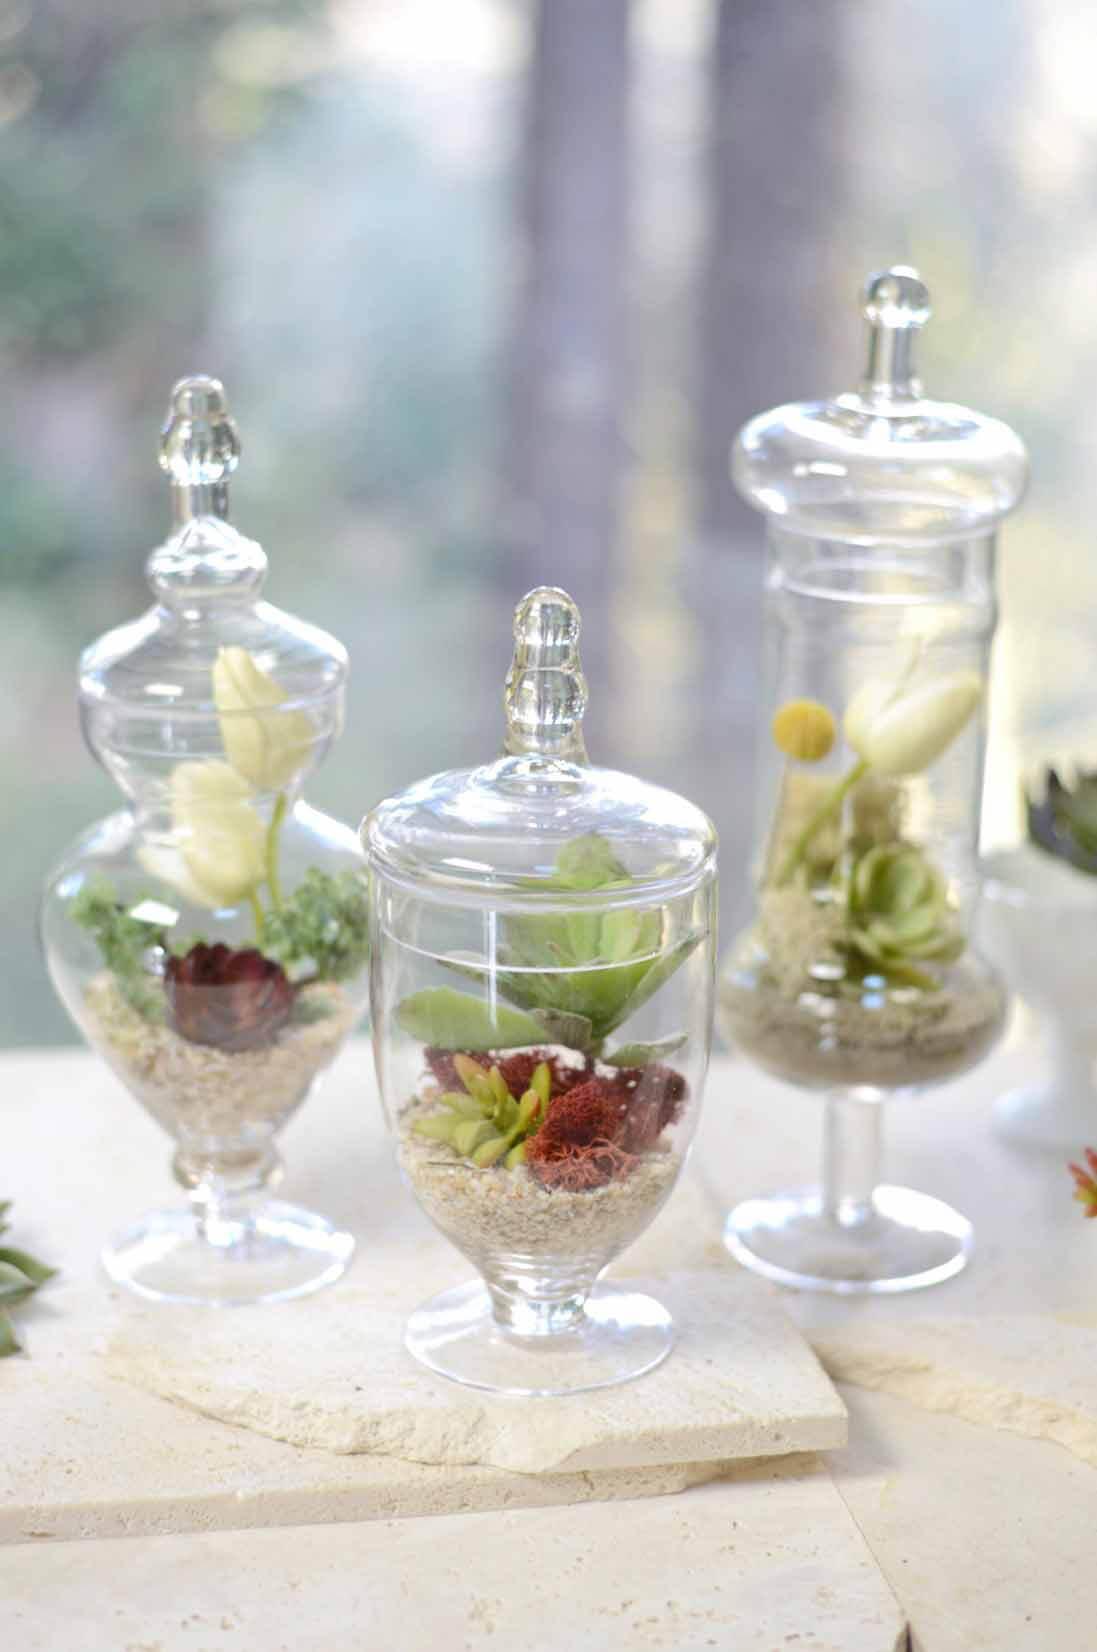 Set Of 3 Glass Apothecary Candy Jars With Lids - 10/12/14